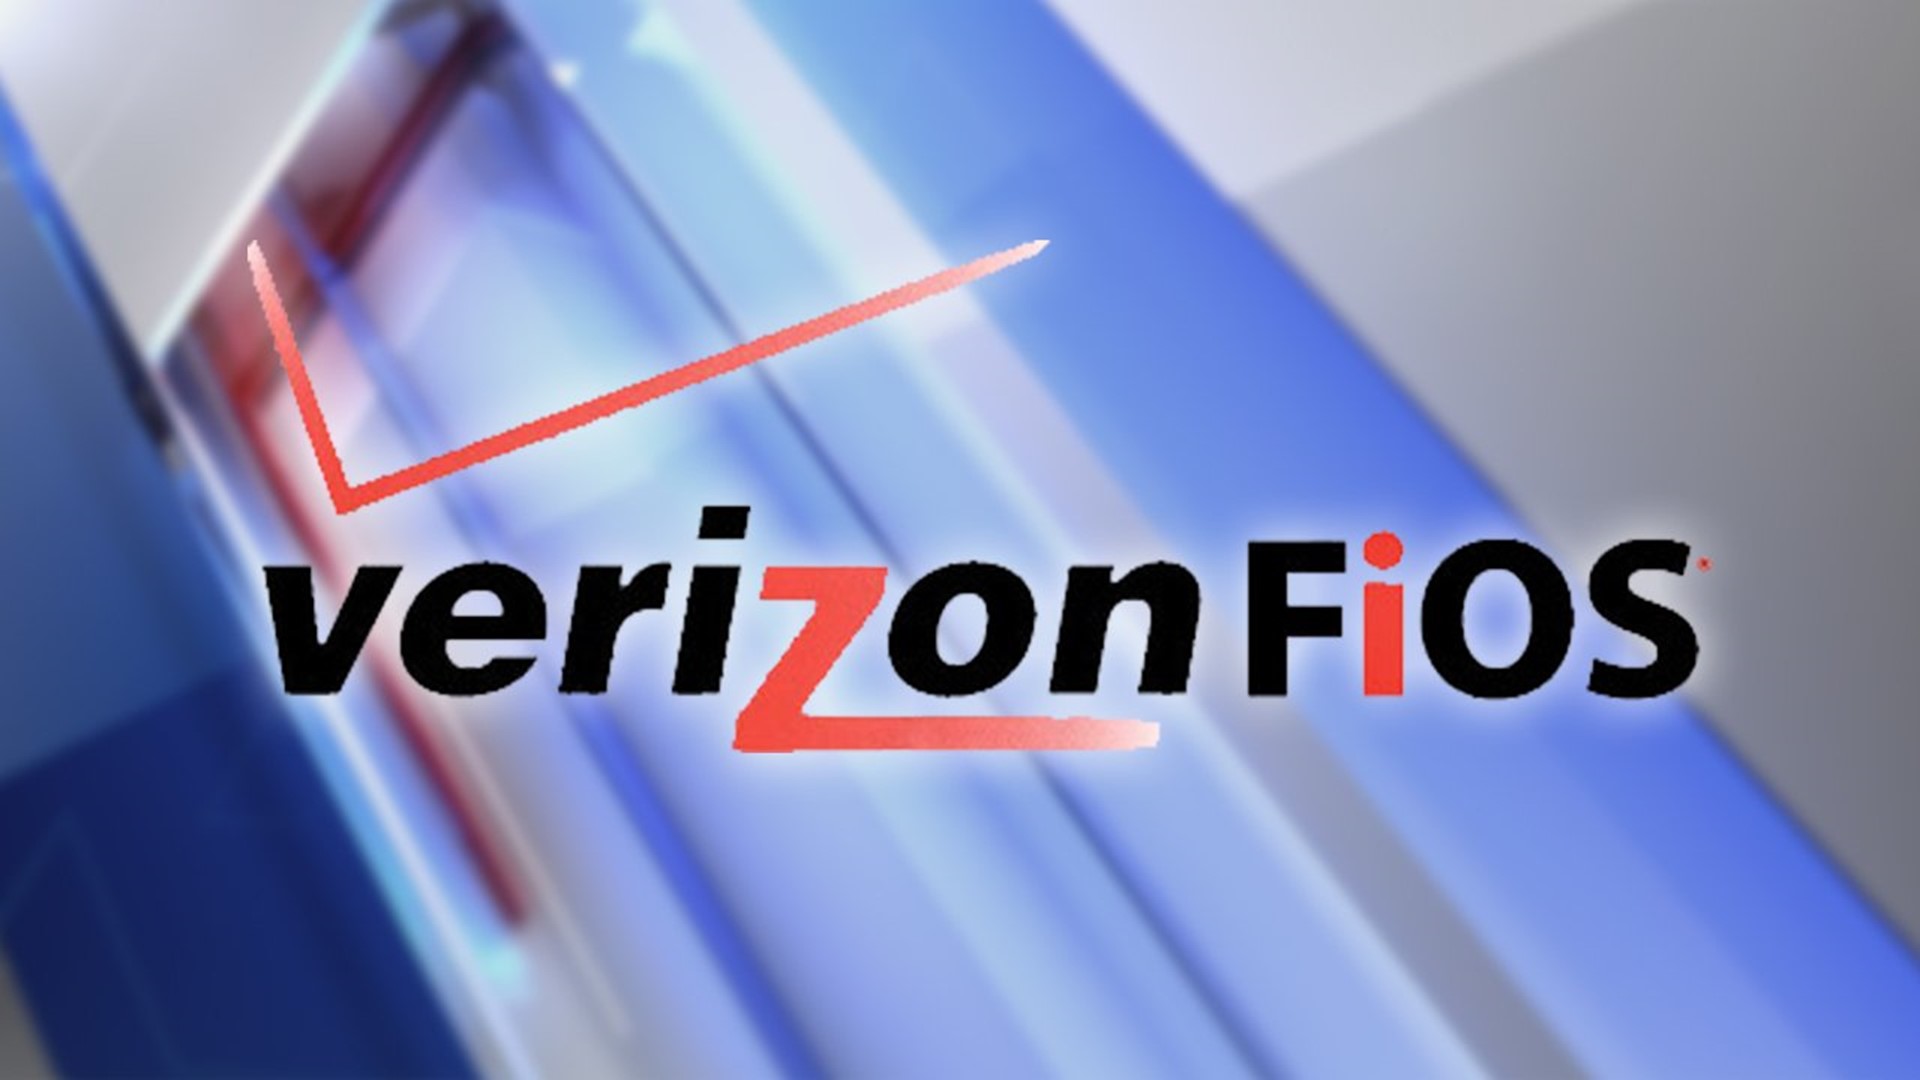 Verizon Fios Ditches Cable Tv Contracts To Become More Like A Streaming